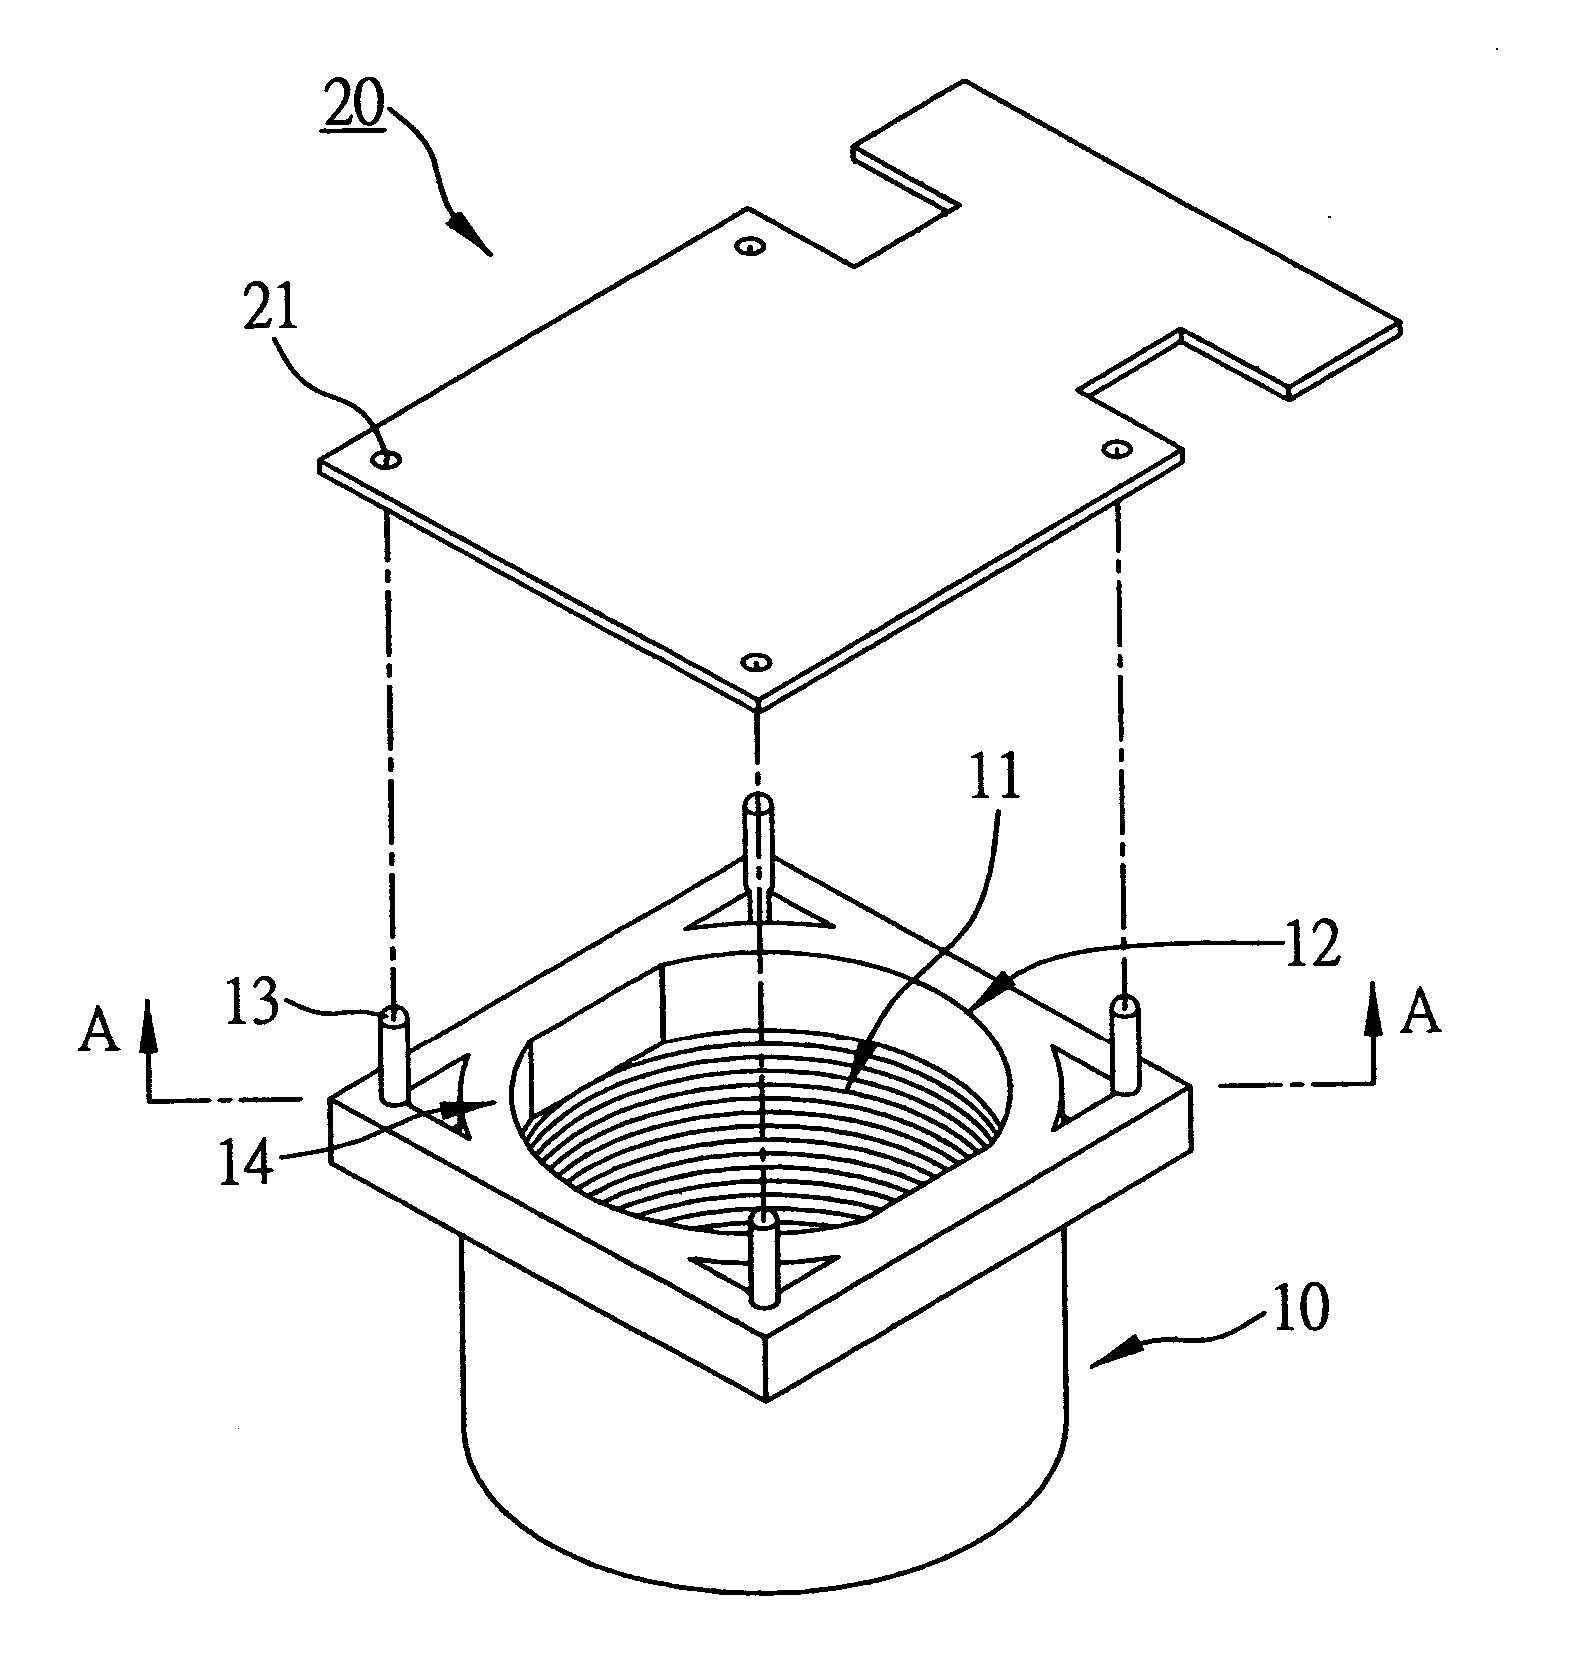 Digital image capturing module assembly and method of fabricating the same